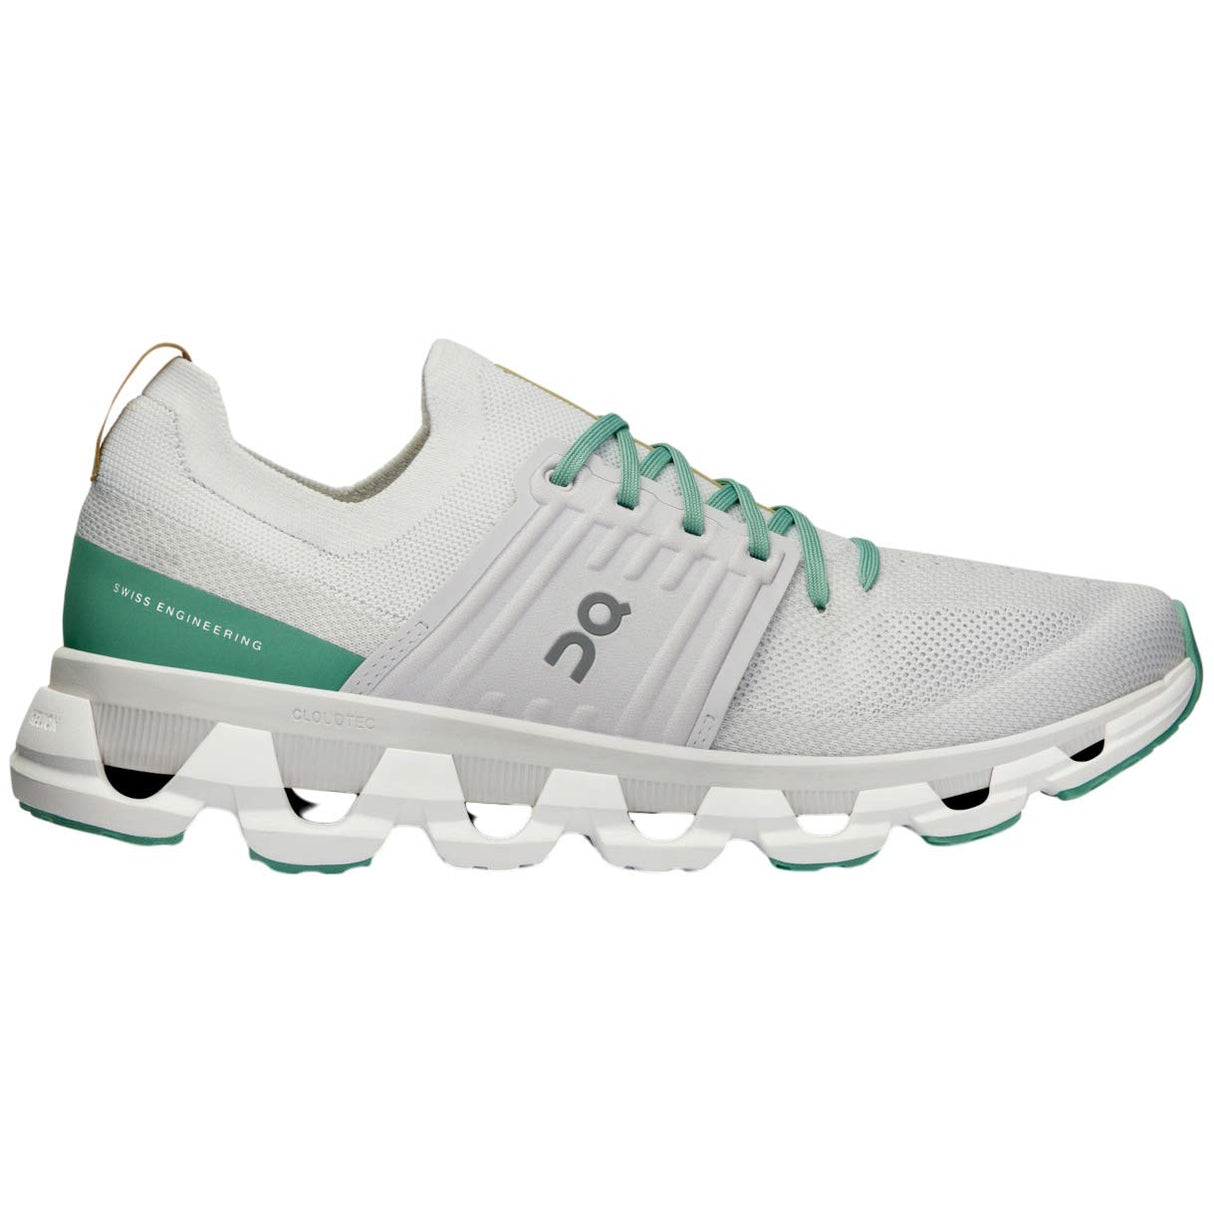 ON Cloudswift 3 Mens Running Shoes